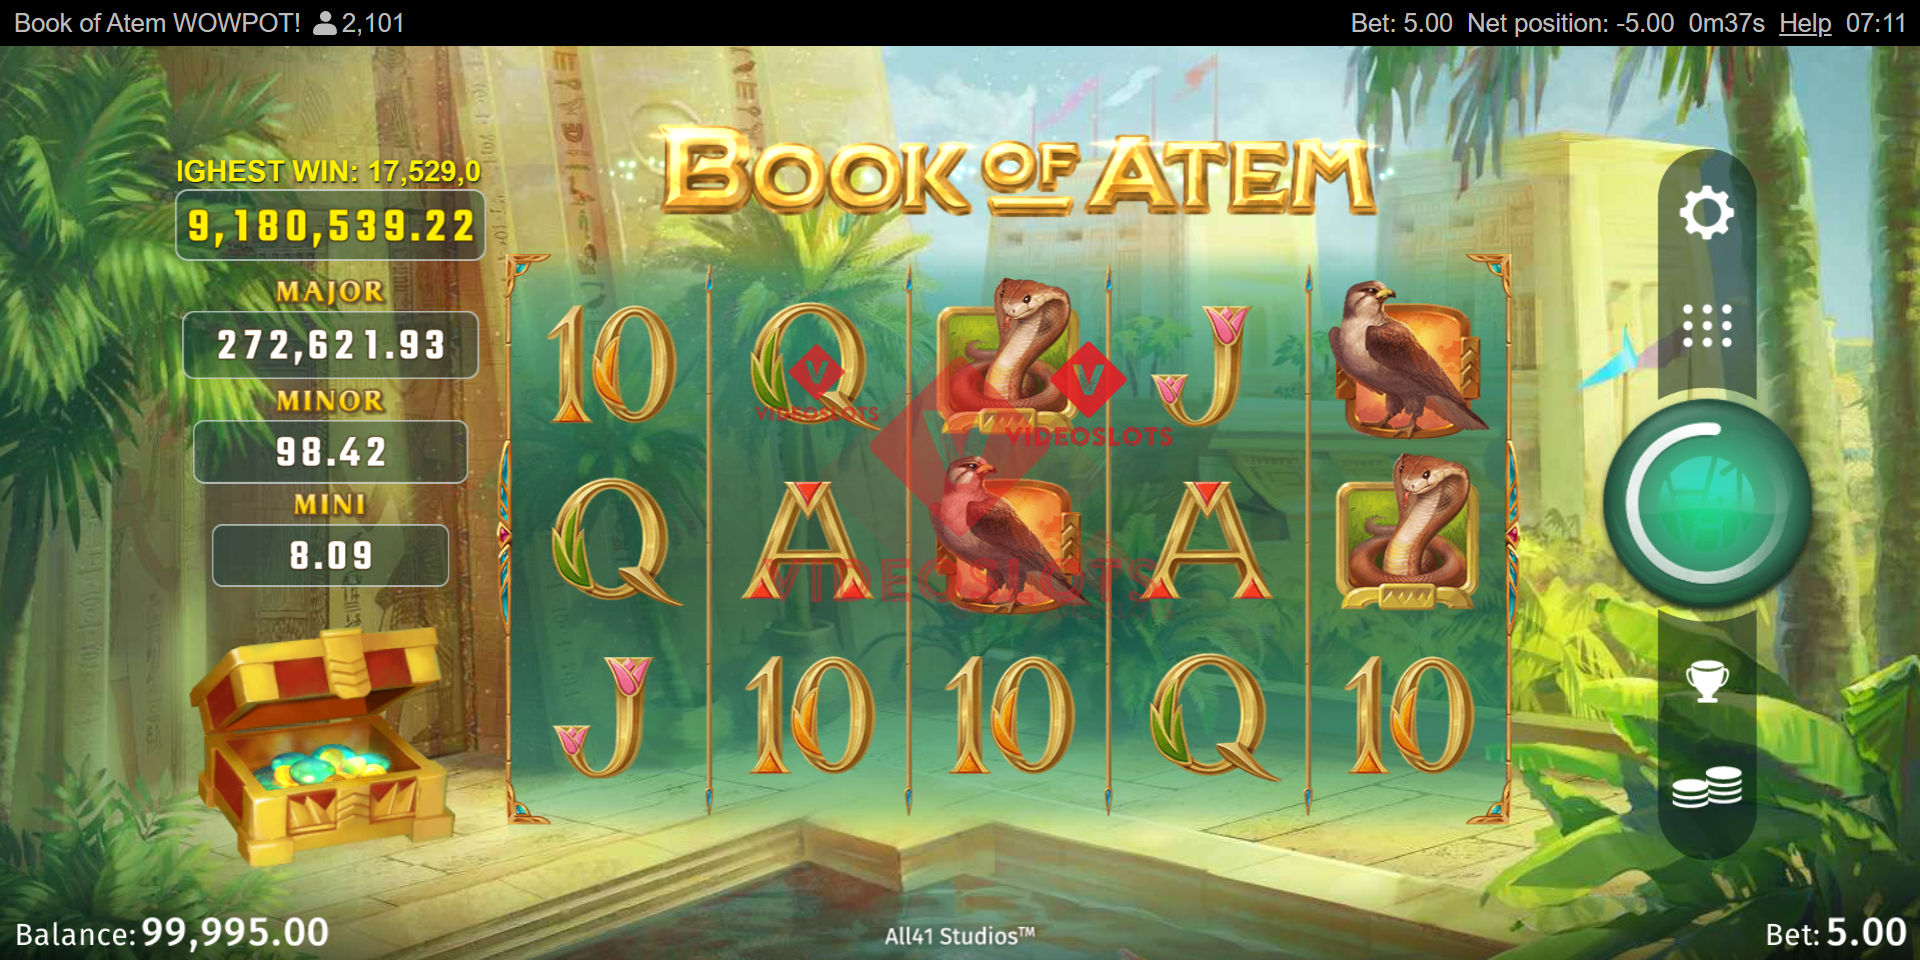 Base Game for Book of Atem WowPot slot for Microgaming